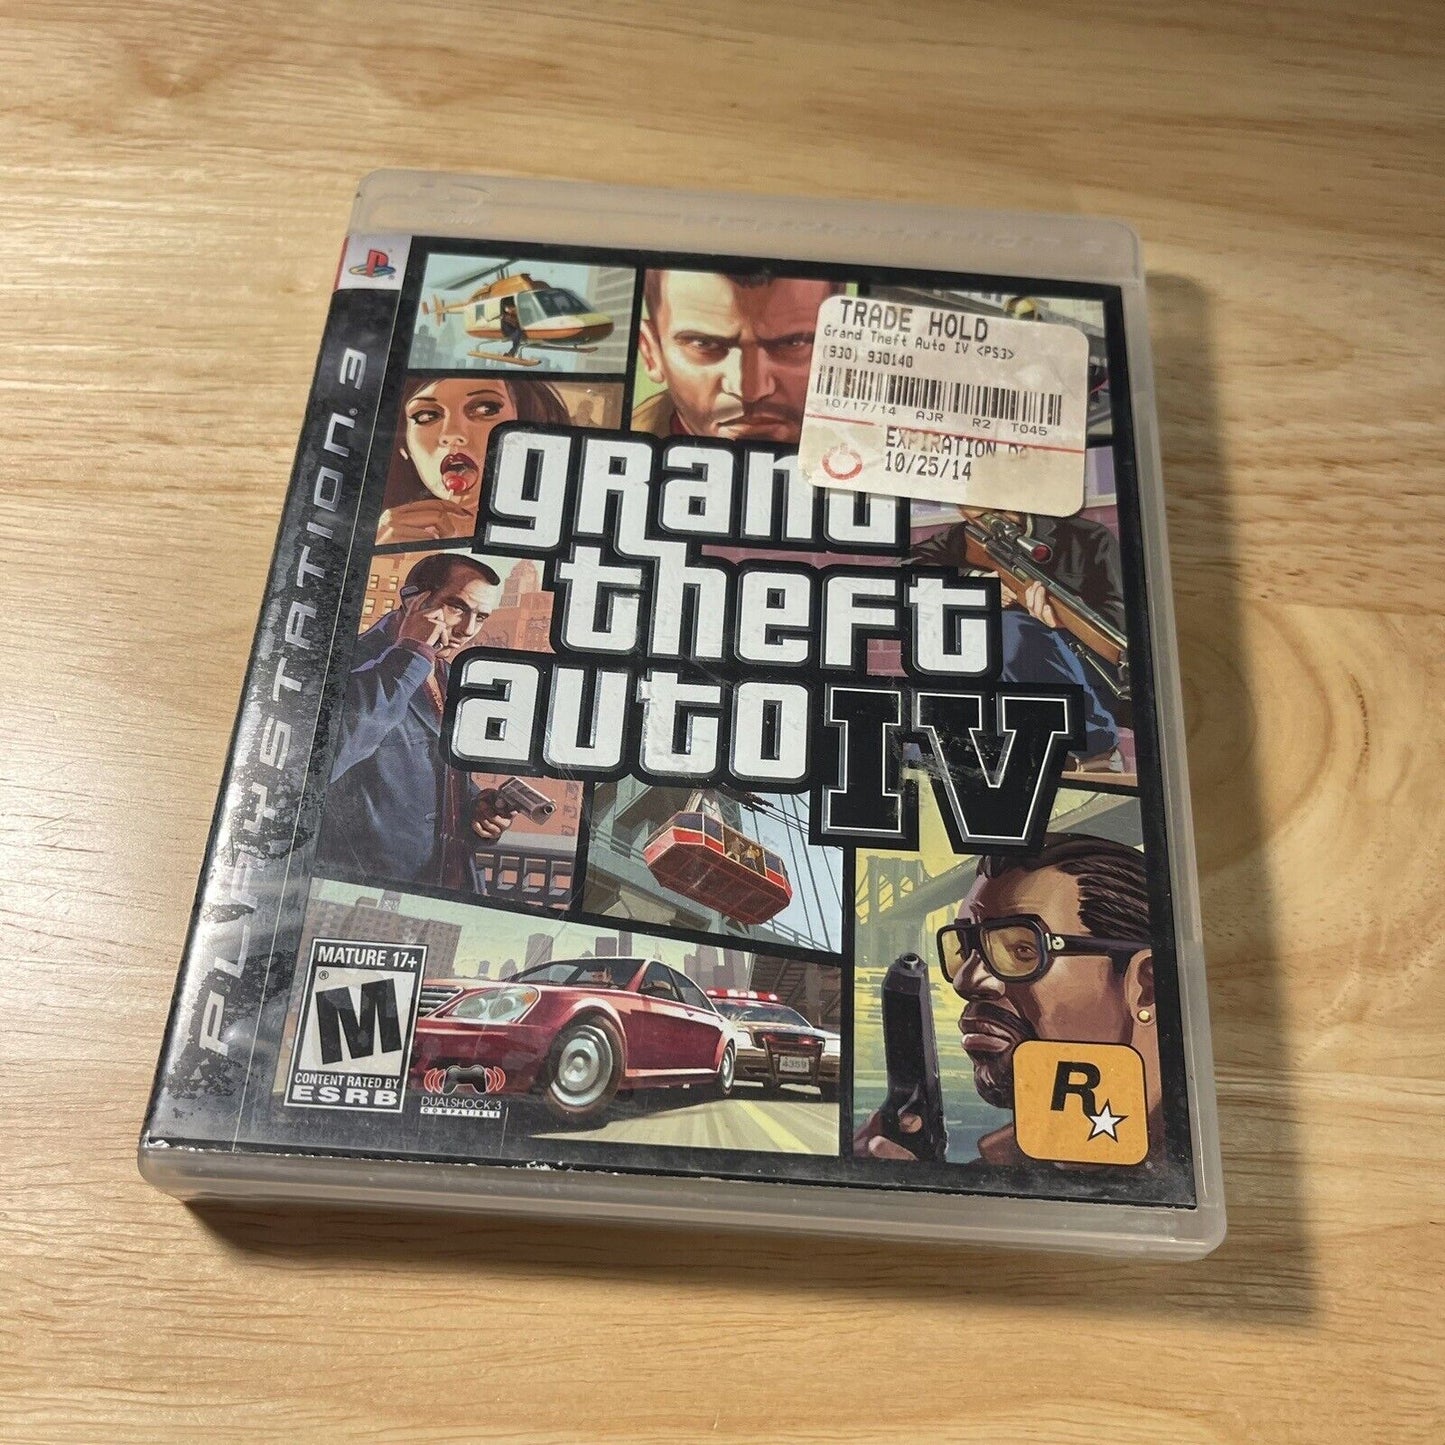 PS3 Grand Theft Auto IV (PlayStation 3, 2008)